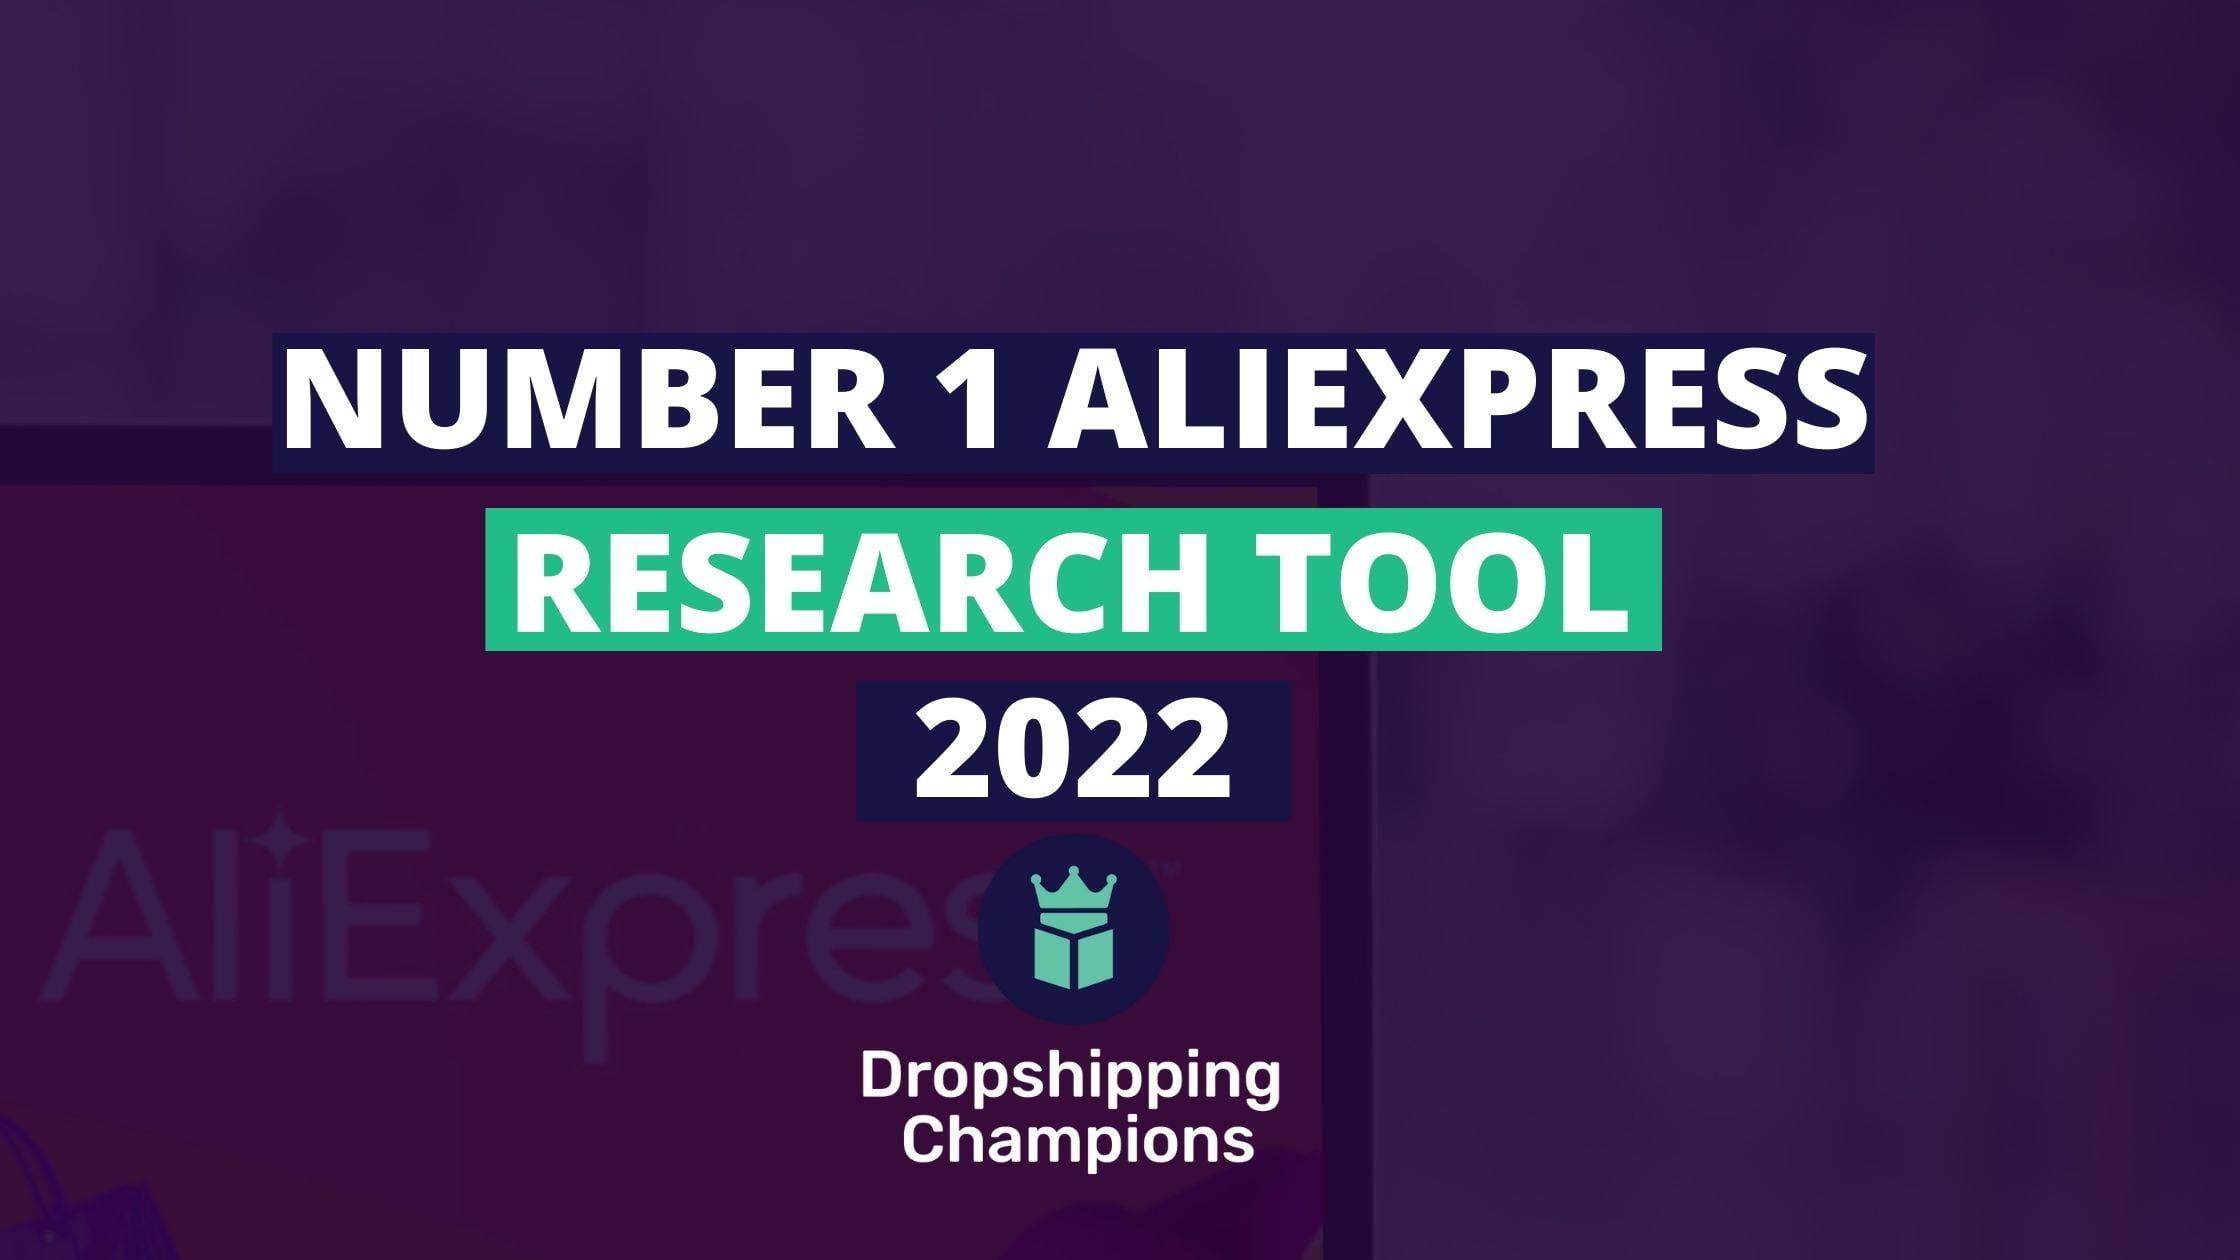 The Number 1 AliExpress Product Research Tool